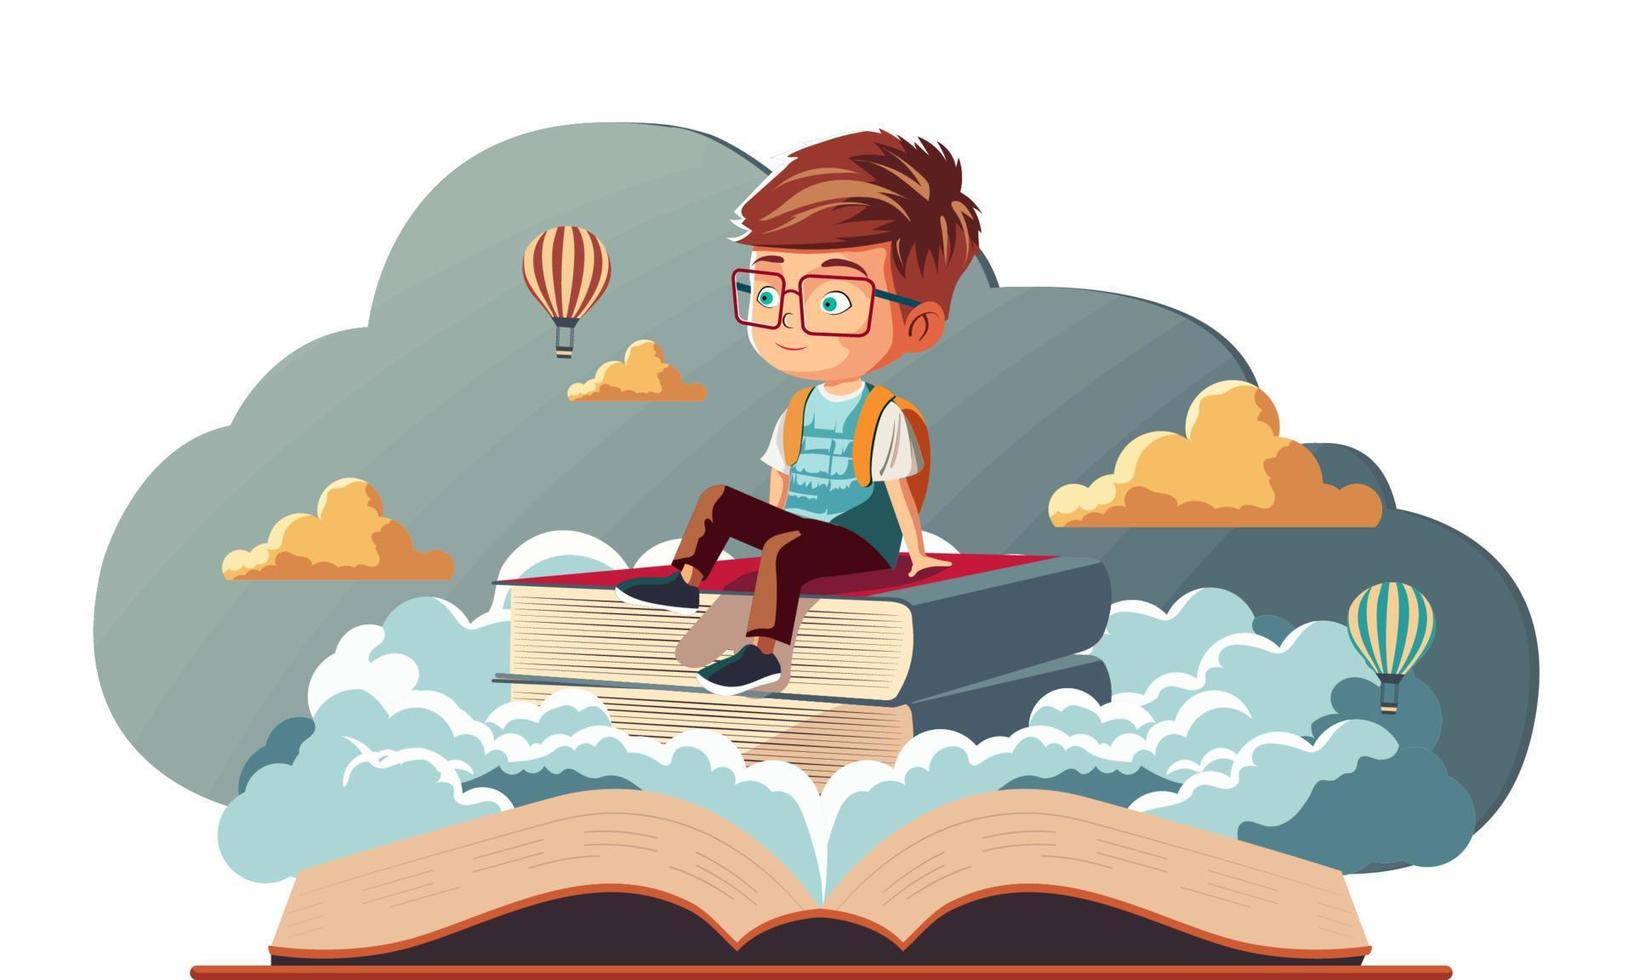 Student Boy Character Sitting On Book Stack With Hot Air Balloons On Clouds Background. vector